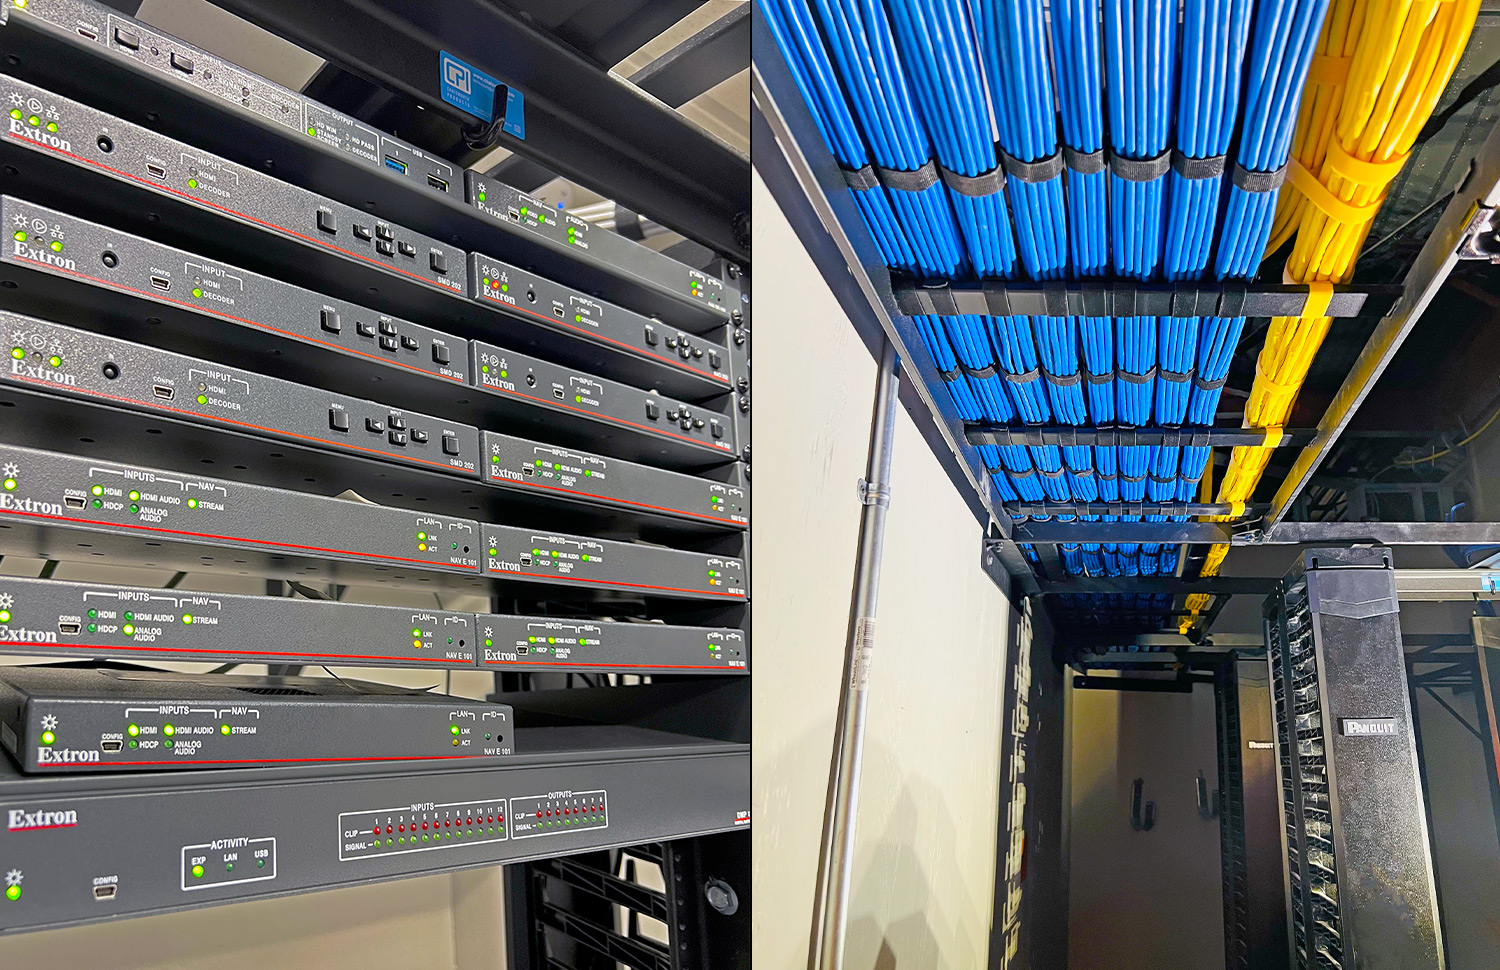 The core of the AV system is contained in racks located in the central Telecommunications Room. AV content is distributed over CAT 6A Ethernet cable to endpoints throughout the building via NAV AV over IP and Dante networks.